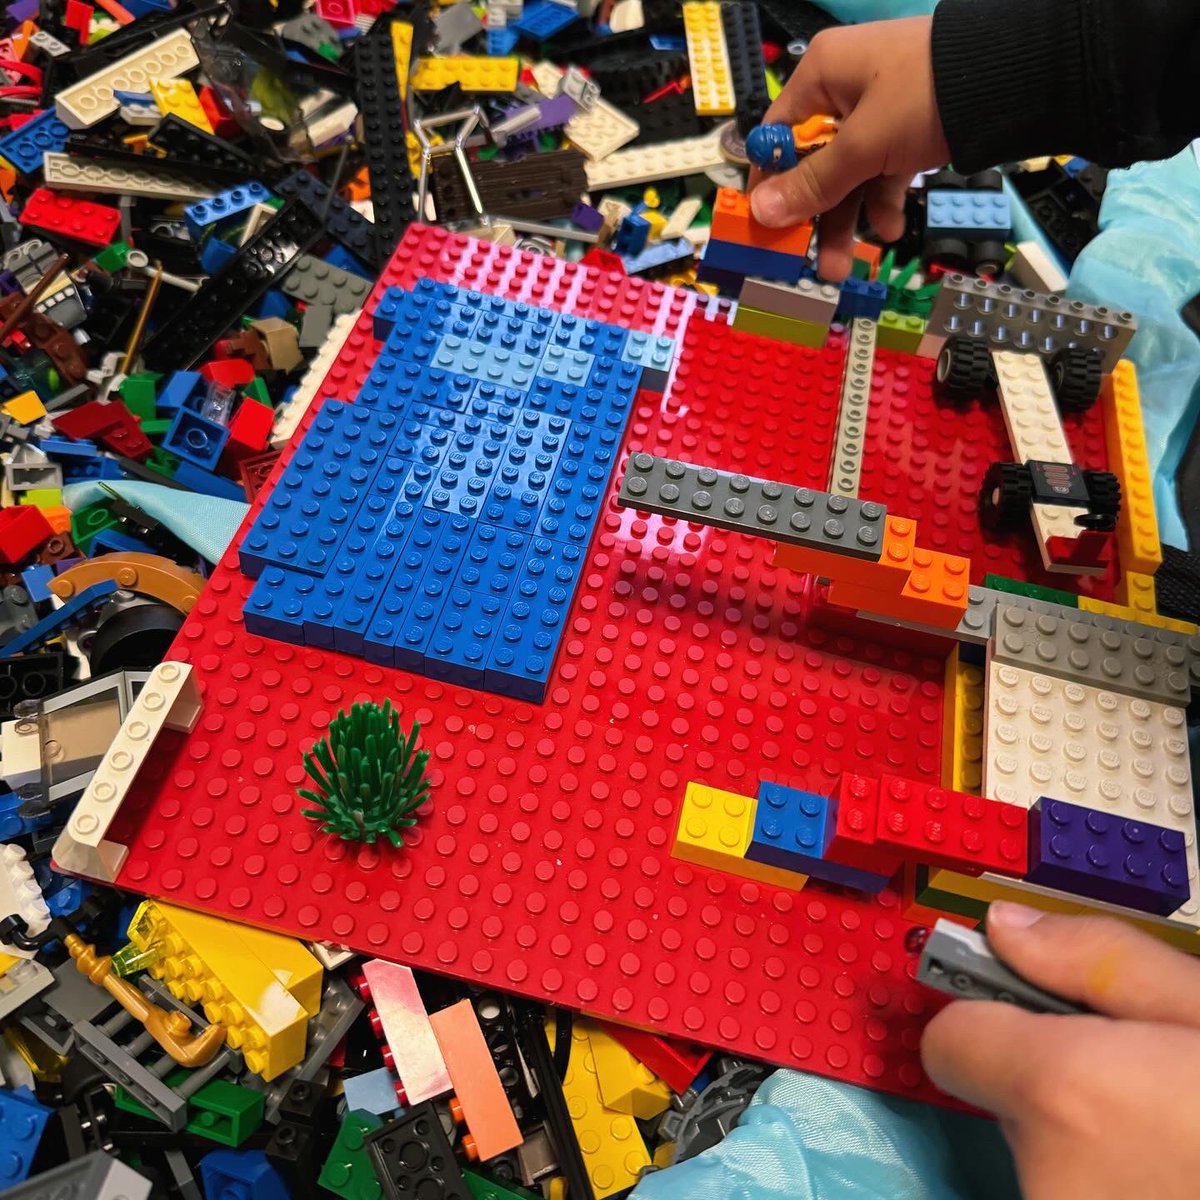 We have so much fun at #LegoClub on Tuesday’s from 4-5pm at #CharltonLibrary! 🧱 We made some imaginative builds which are on display in the children’s library! Create, learn and share your skills with other #LEGO enthusiasts, make friends and have fun! #LoveYourLibrary